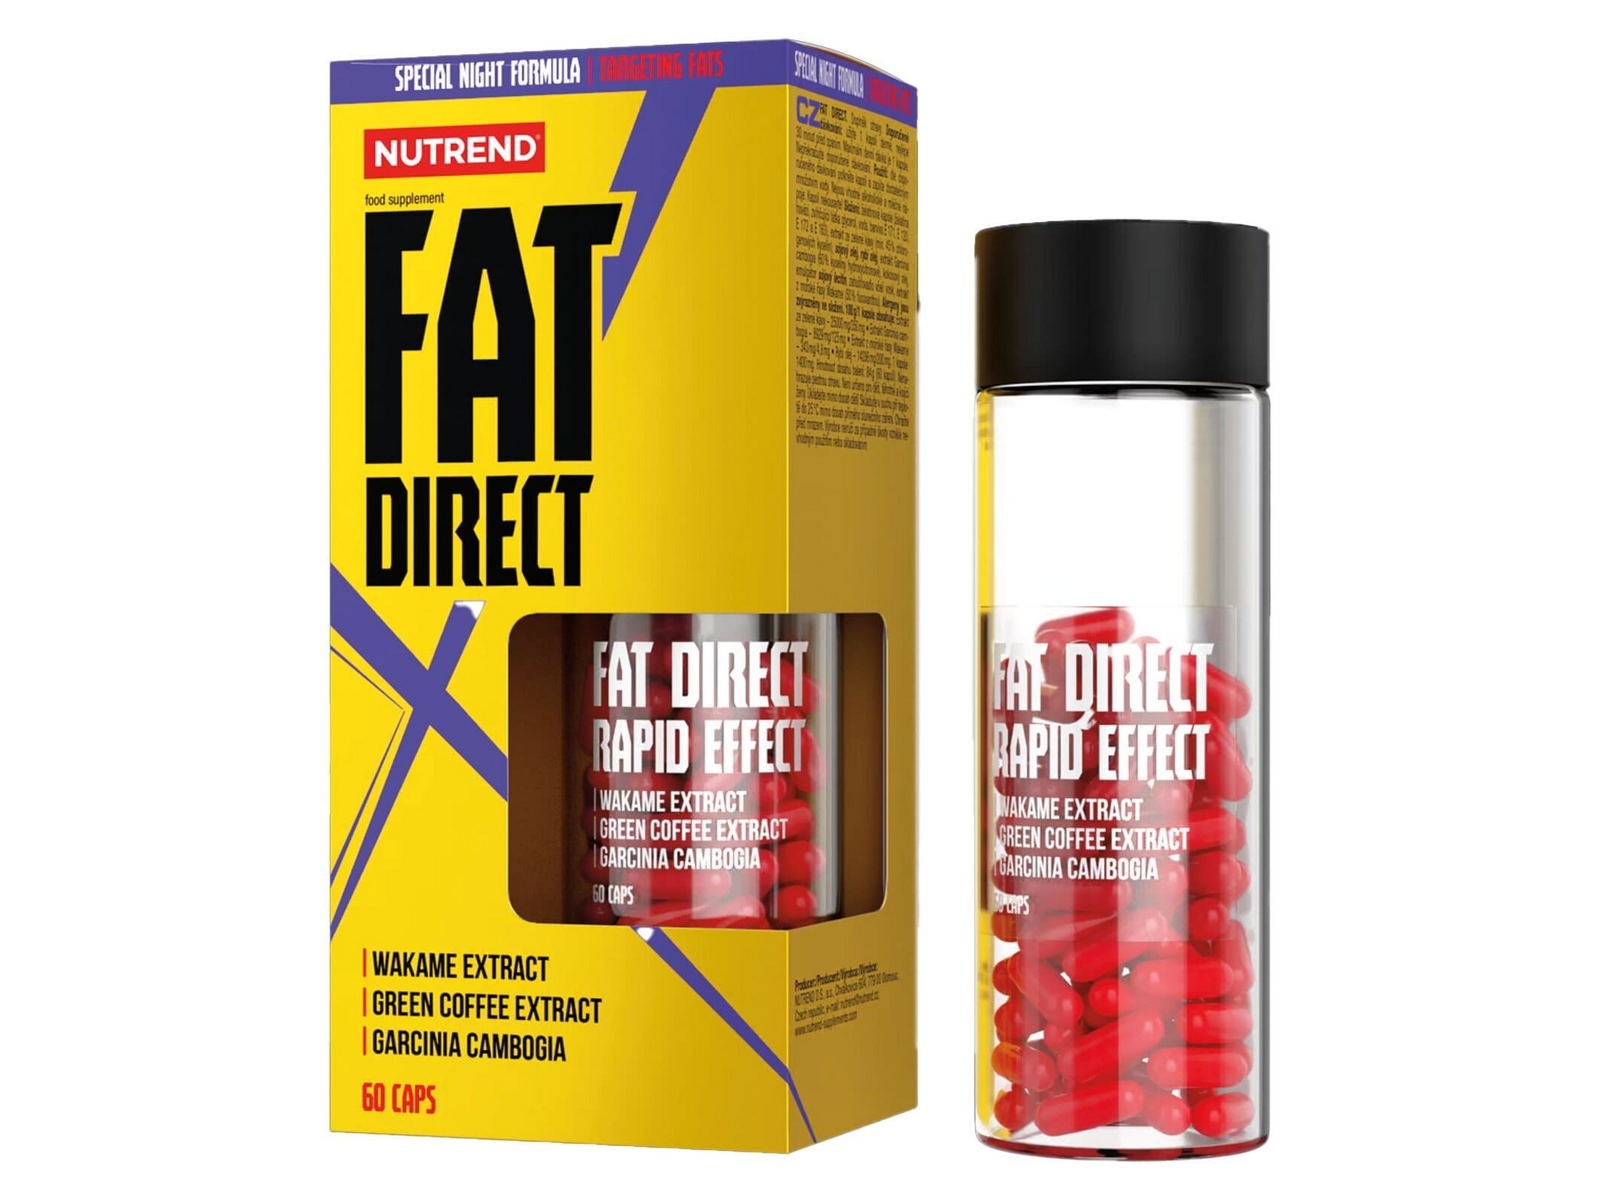 Fat Direct NUTREND